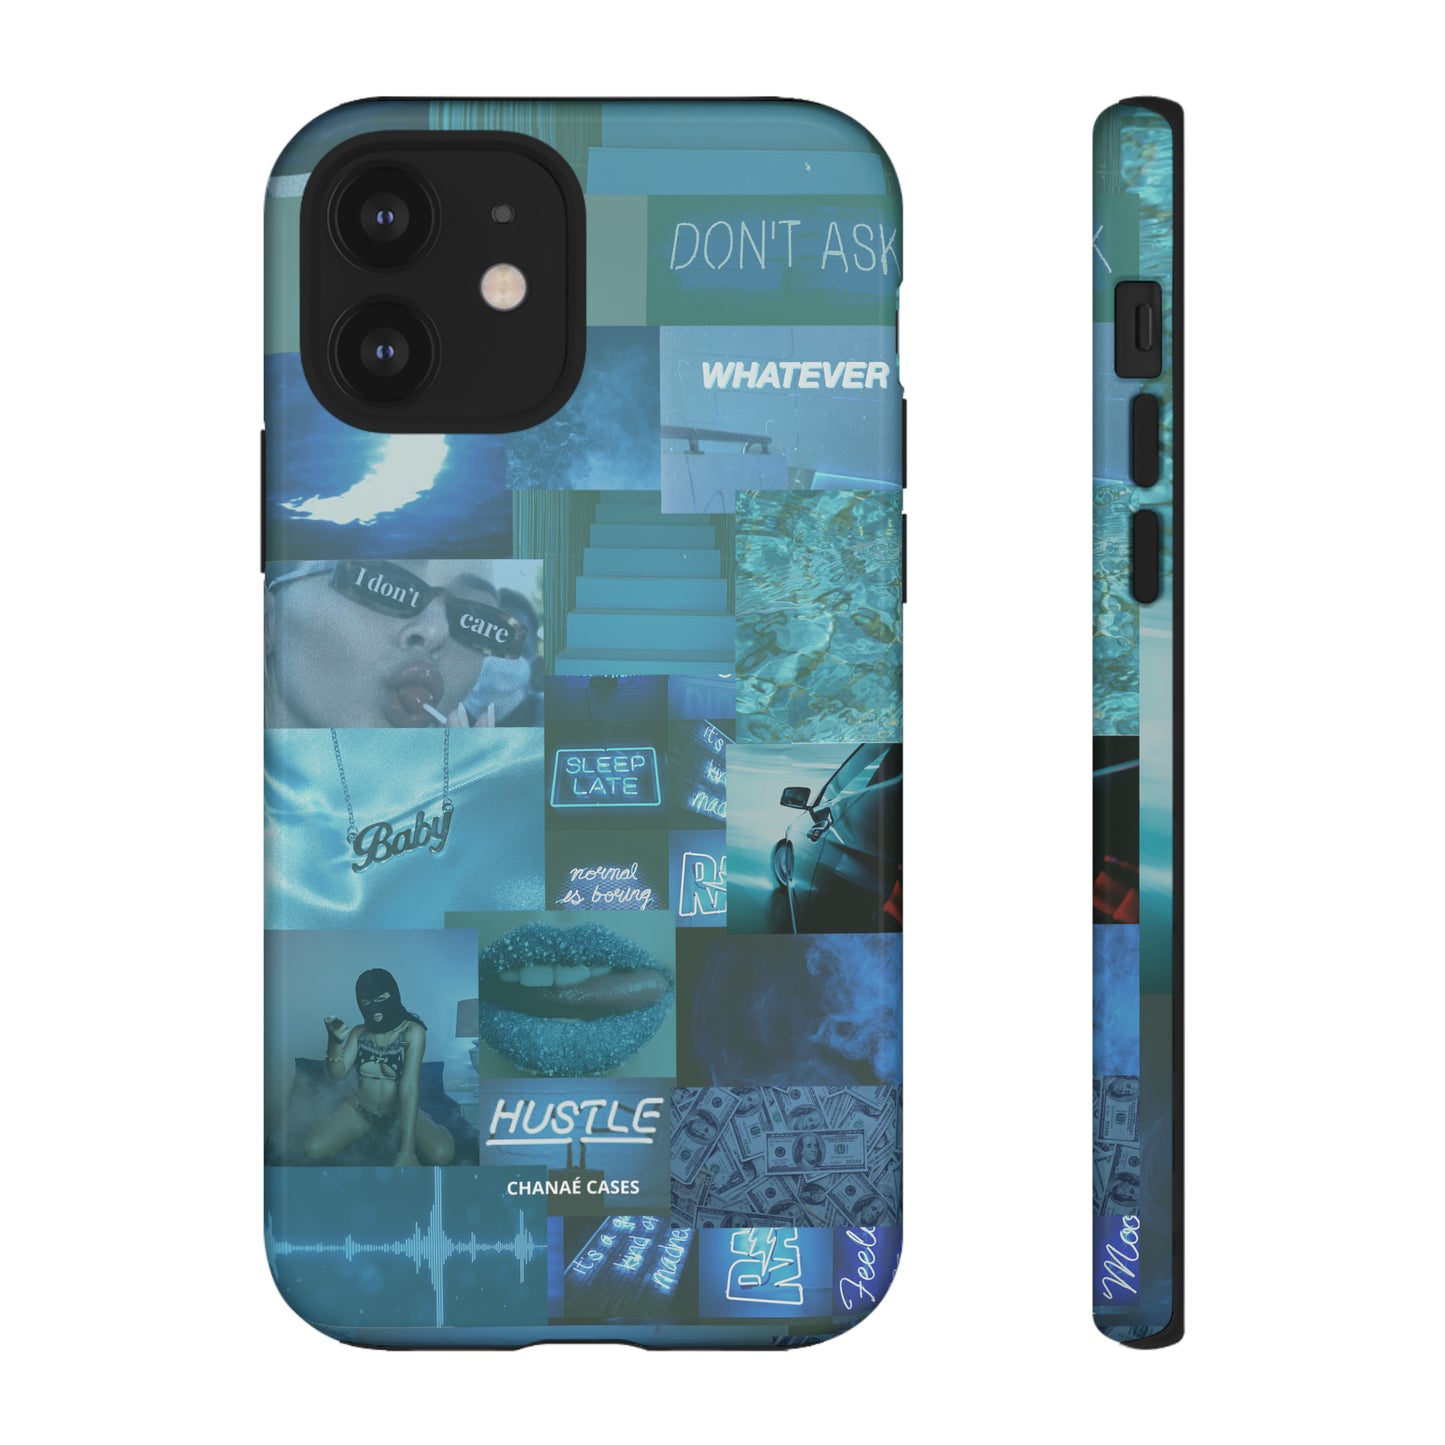 Dayjuh Aesthetic iPhone "Tough" Case (Blue)